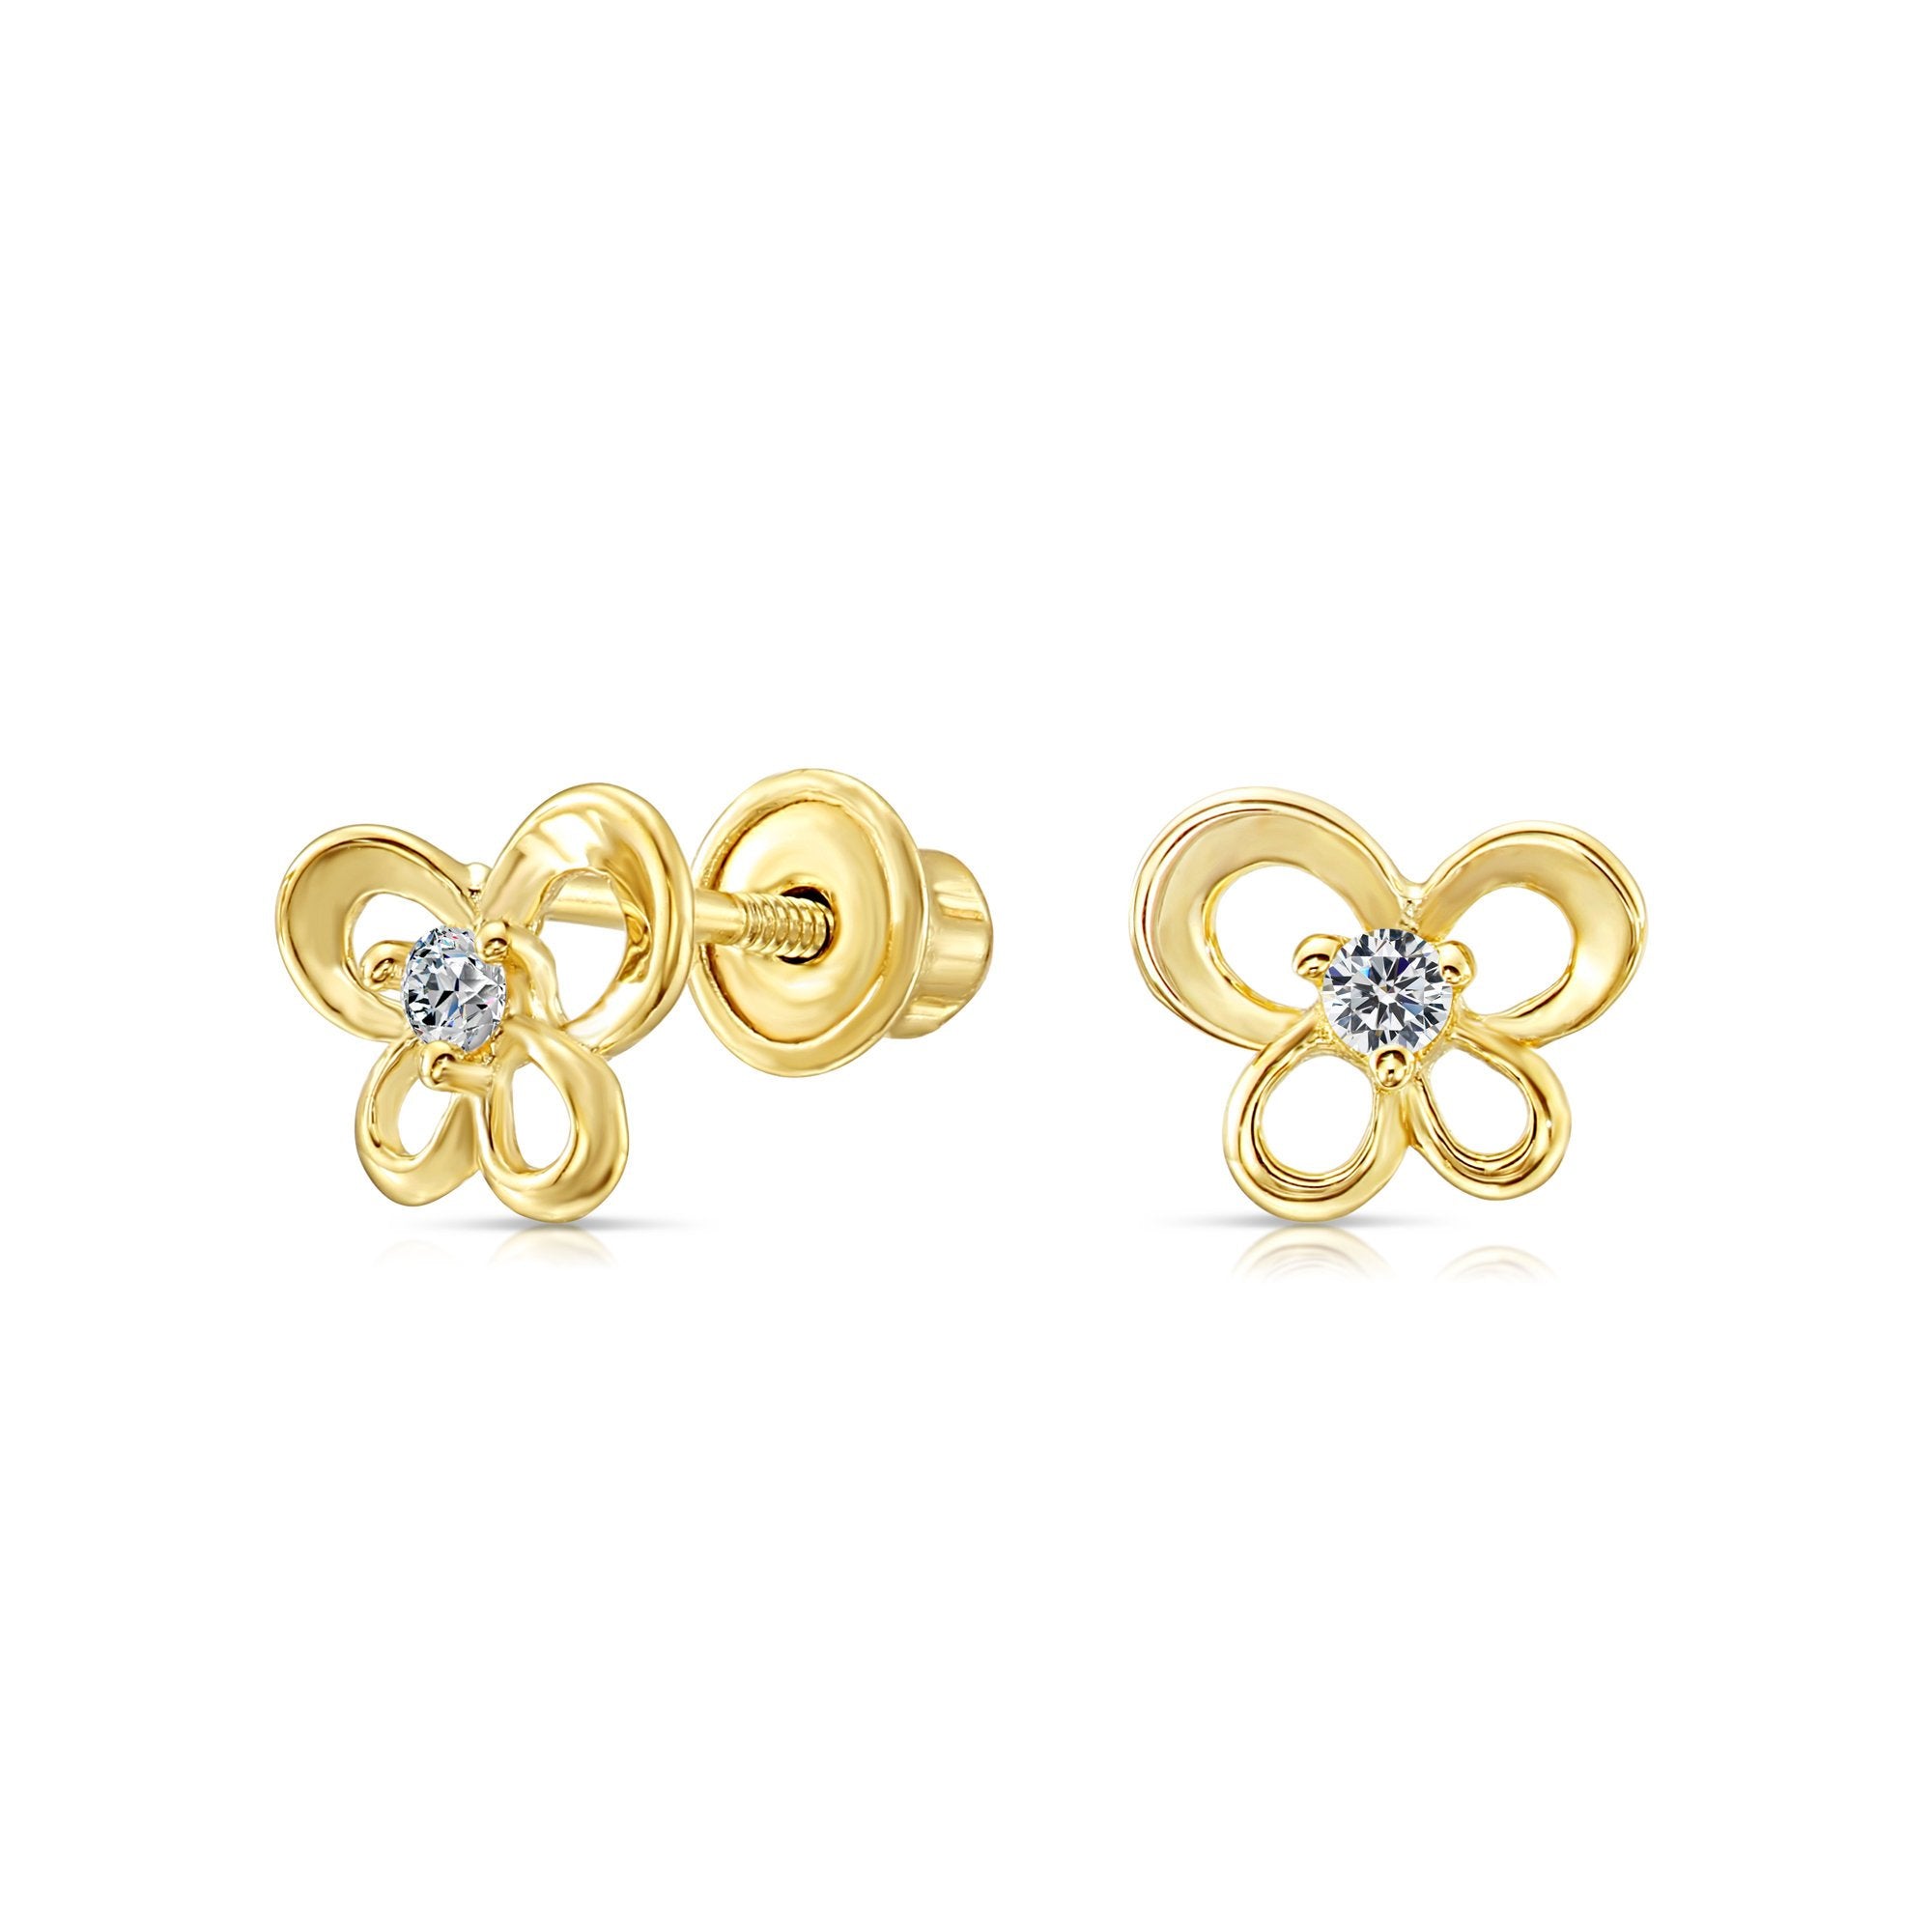 Child's 14kt Yellow Gold Flower Stud Earrings with Diamond Accents |  Ross-Simons